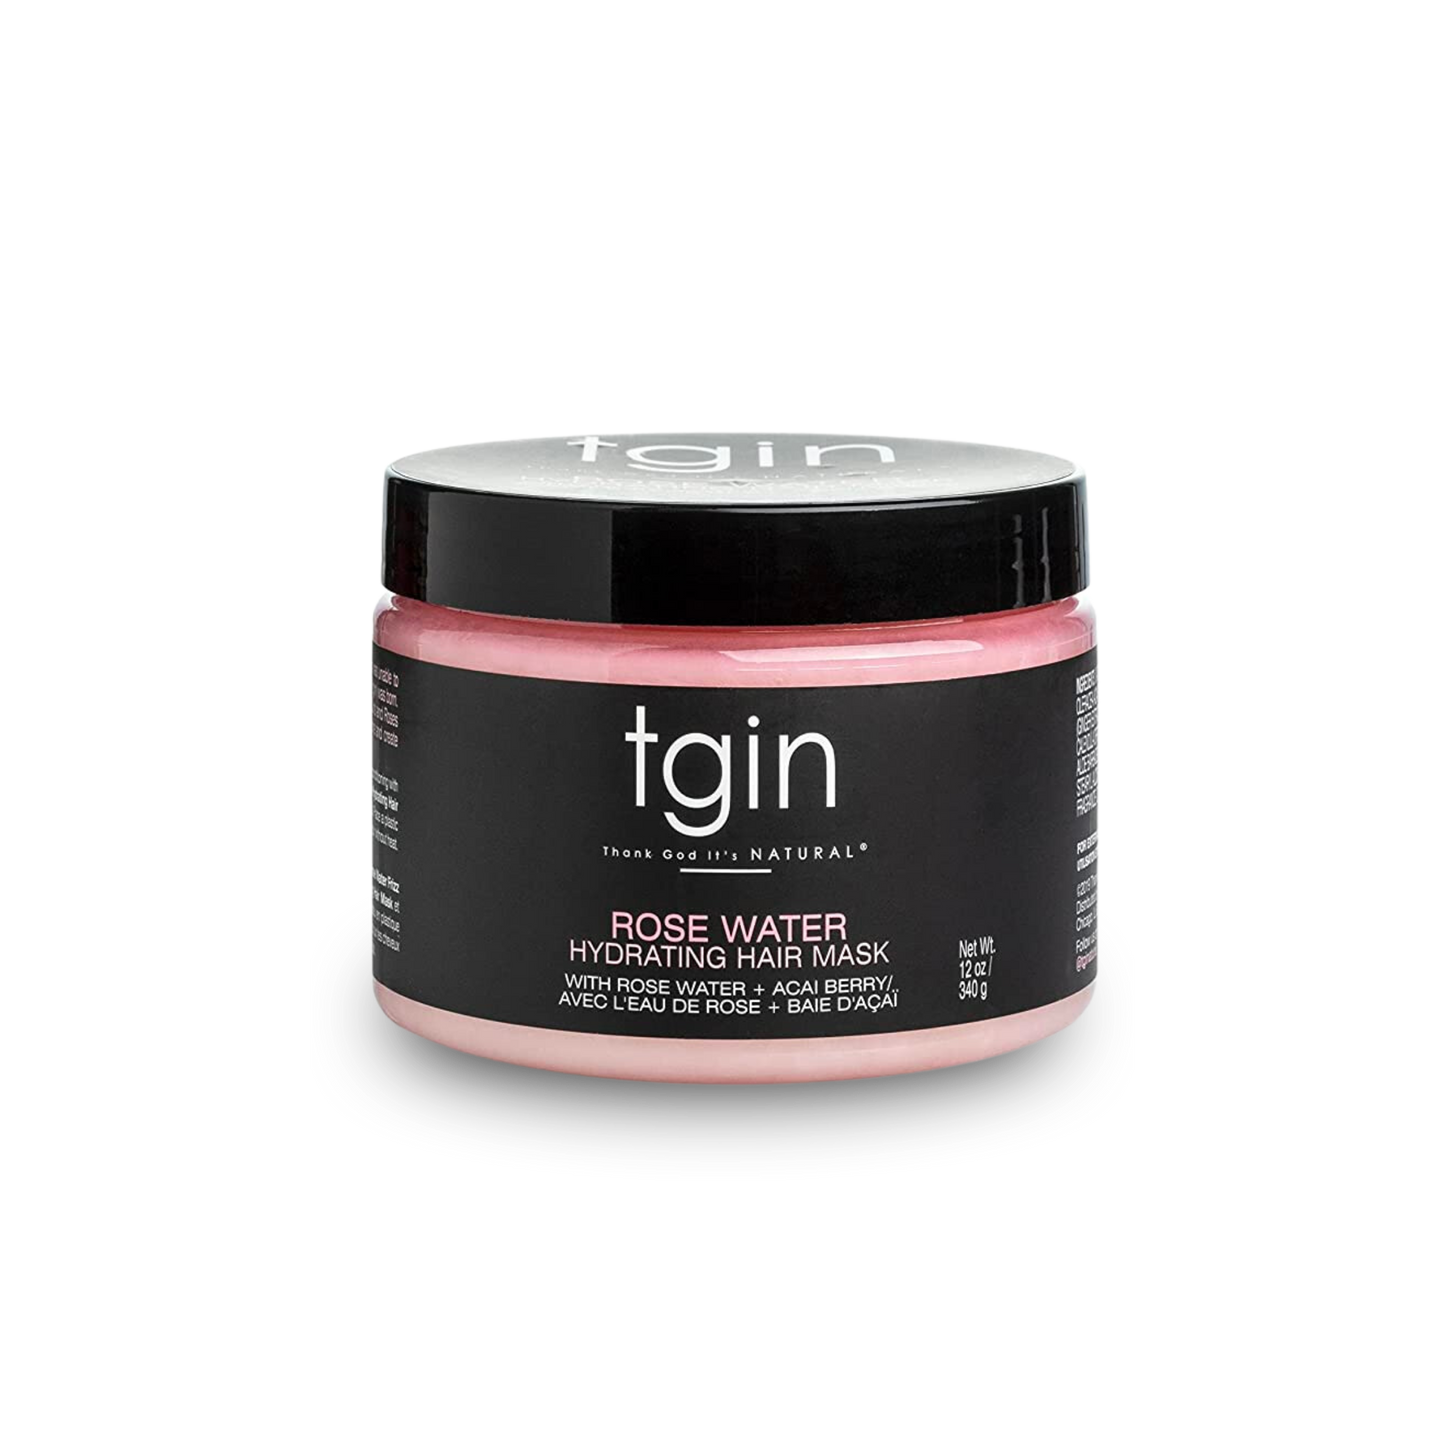 Rose Water Hydrating Hair Mask